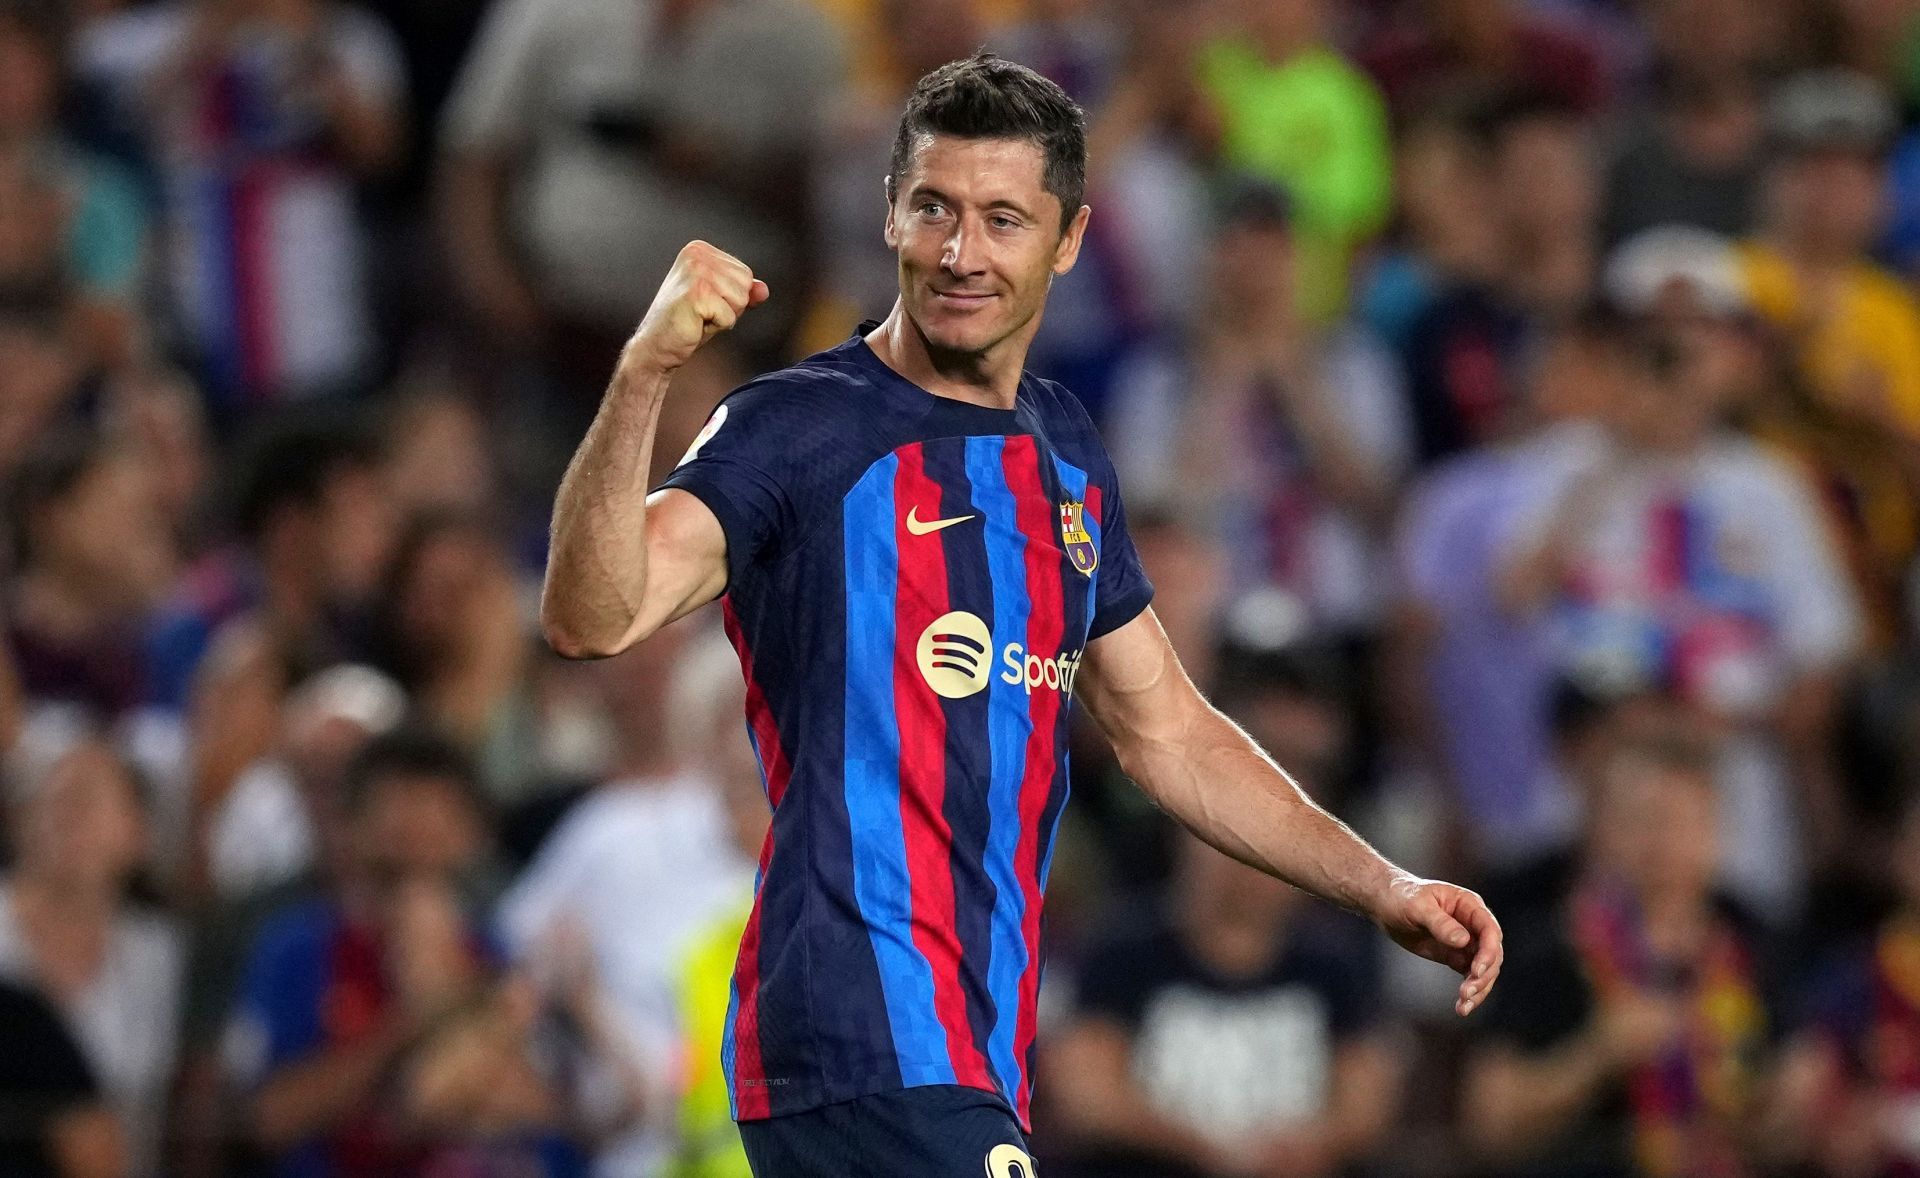 Will Robert Lewandowski guide FC Barcelona to a win over his former side?